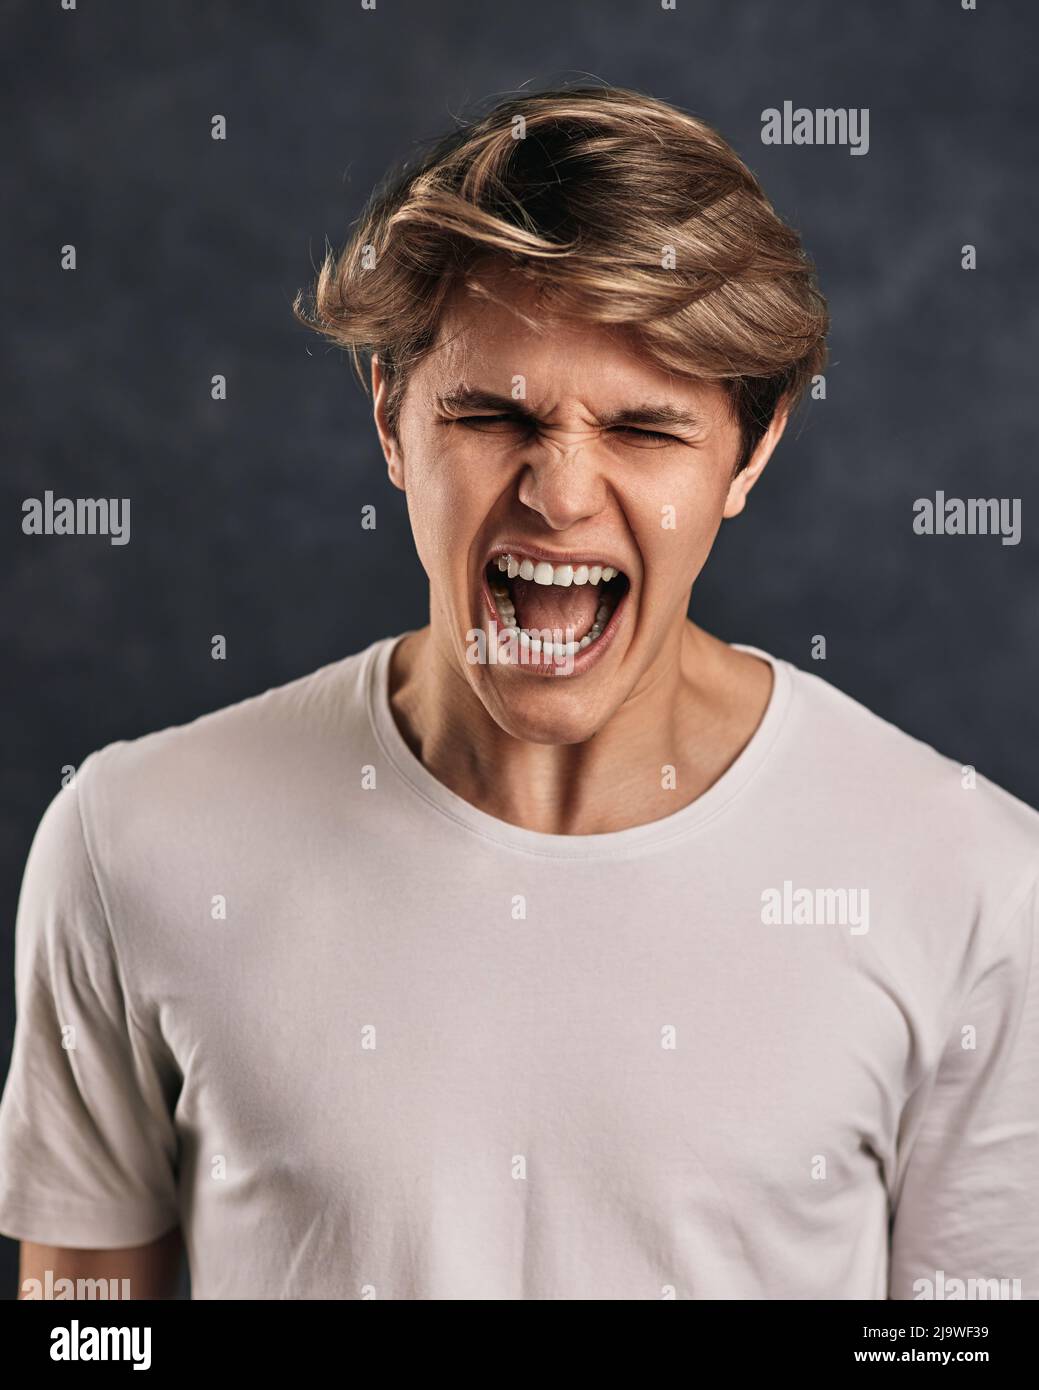 Furious, enraged young man over gray background Stock Photo